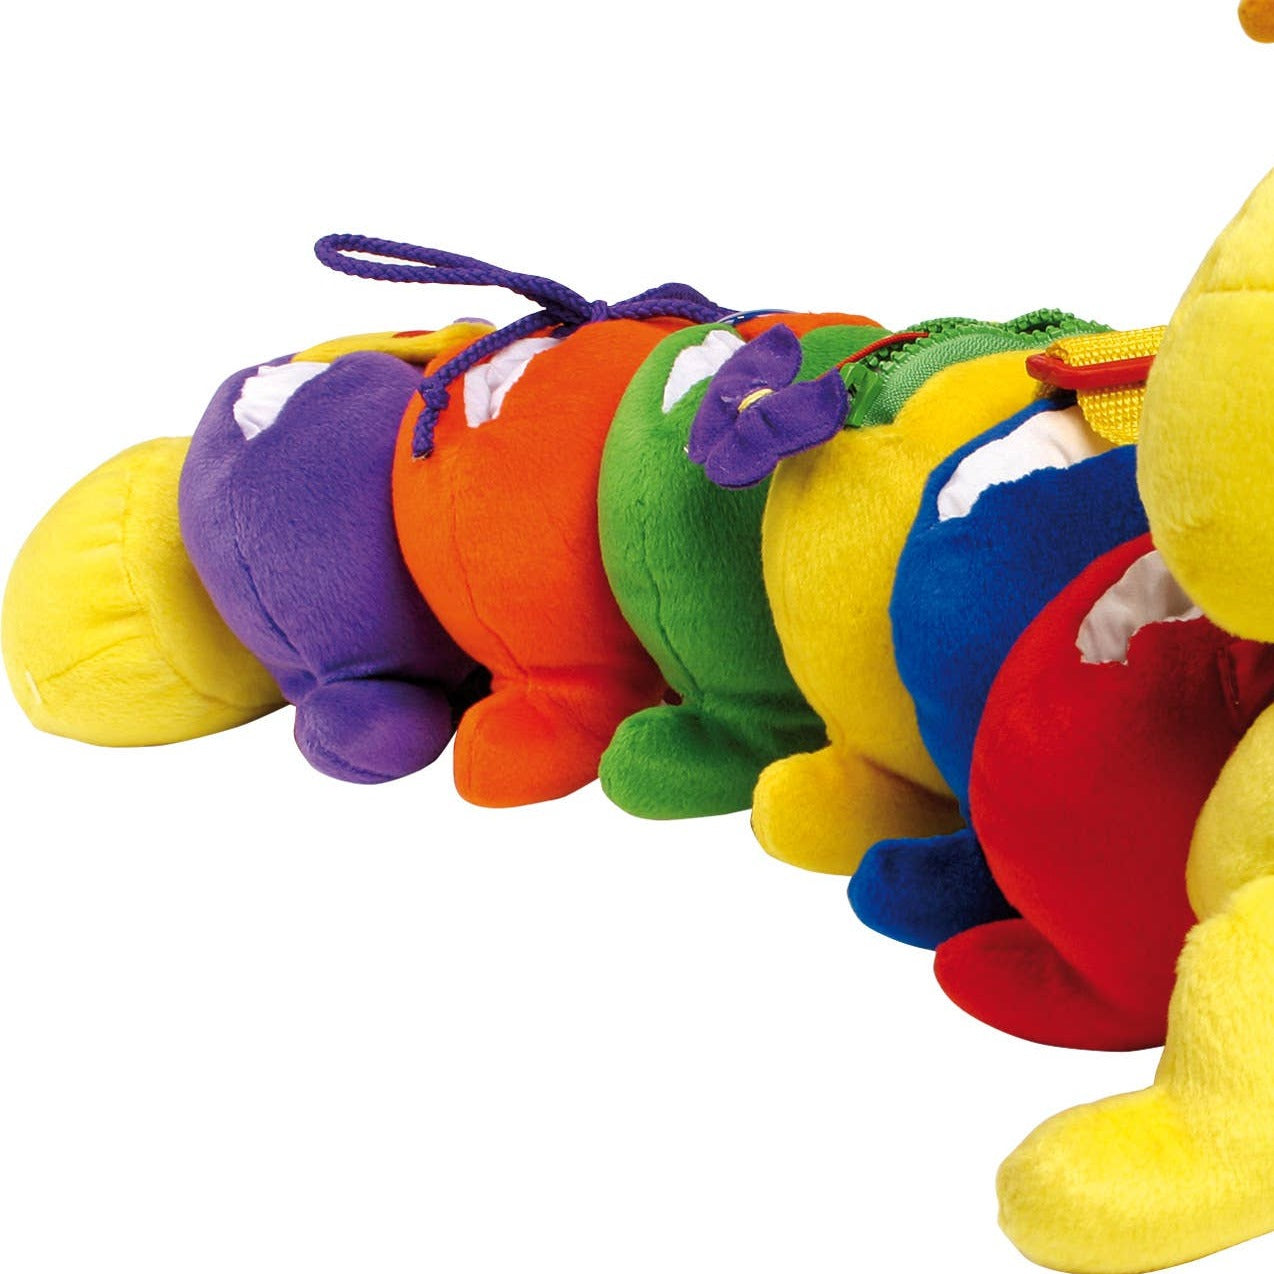 Fine Motor Millipede, The Fine Motor Millipede is the perfect companion for your child's journey to learning important life skills, while experiencing endless fun and enjoyment. This cute and colorful Fine Motor Millipede is not only a snuggle-pal but also a learning toy as it teaches children how to dress themselves.The Fine Motor Millipede features small pockets to place rewards in for accomplishment, which makes the process of getting dressed a fun game for children.Additionally, the Fine Motor Millipede